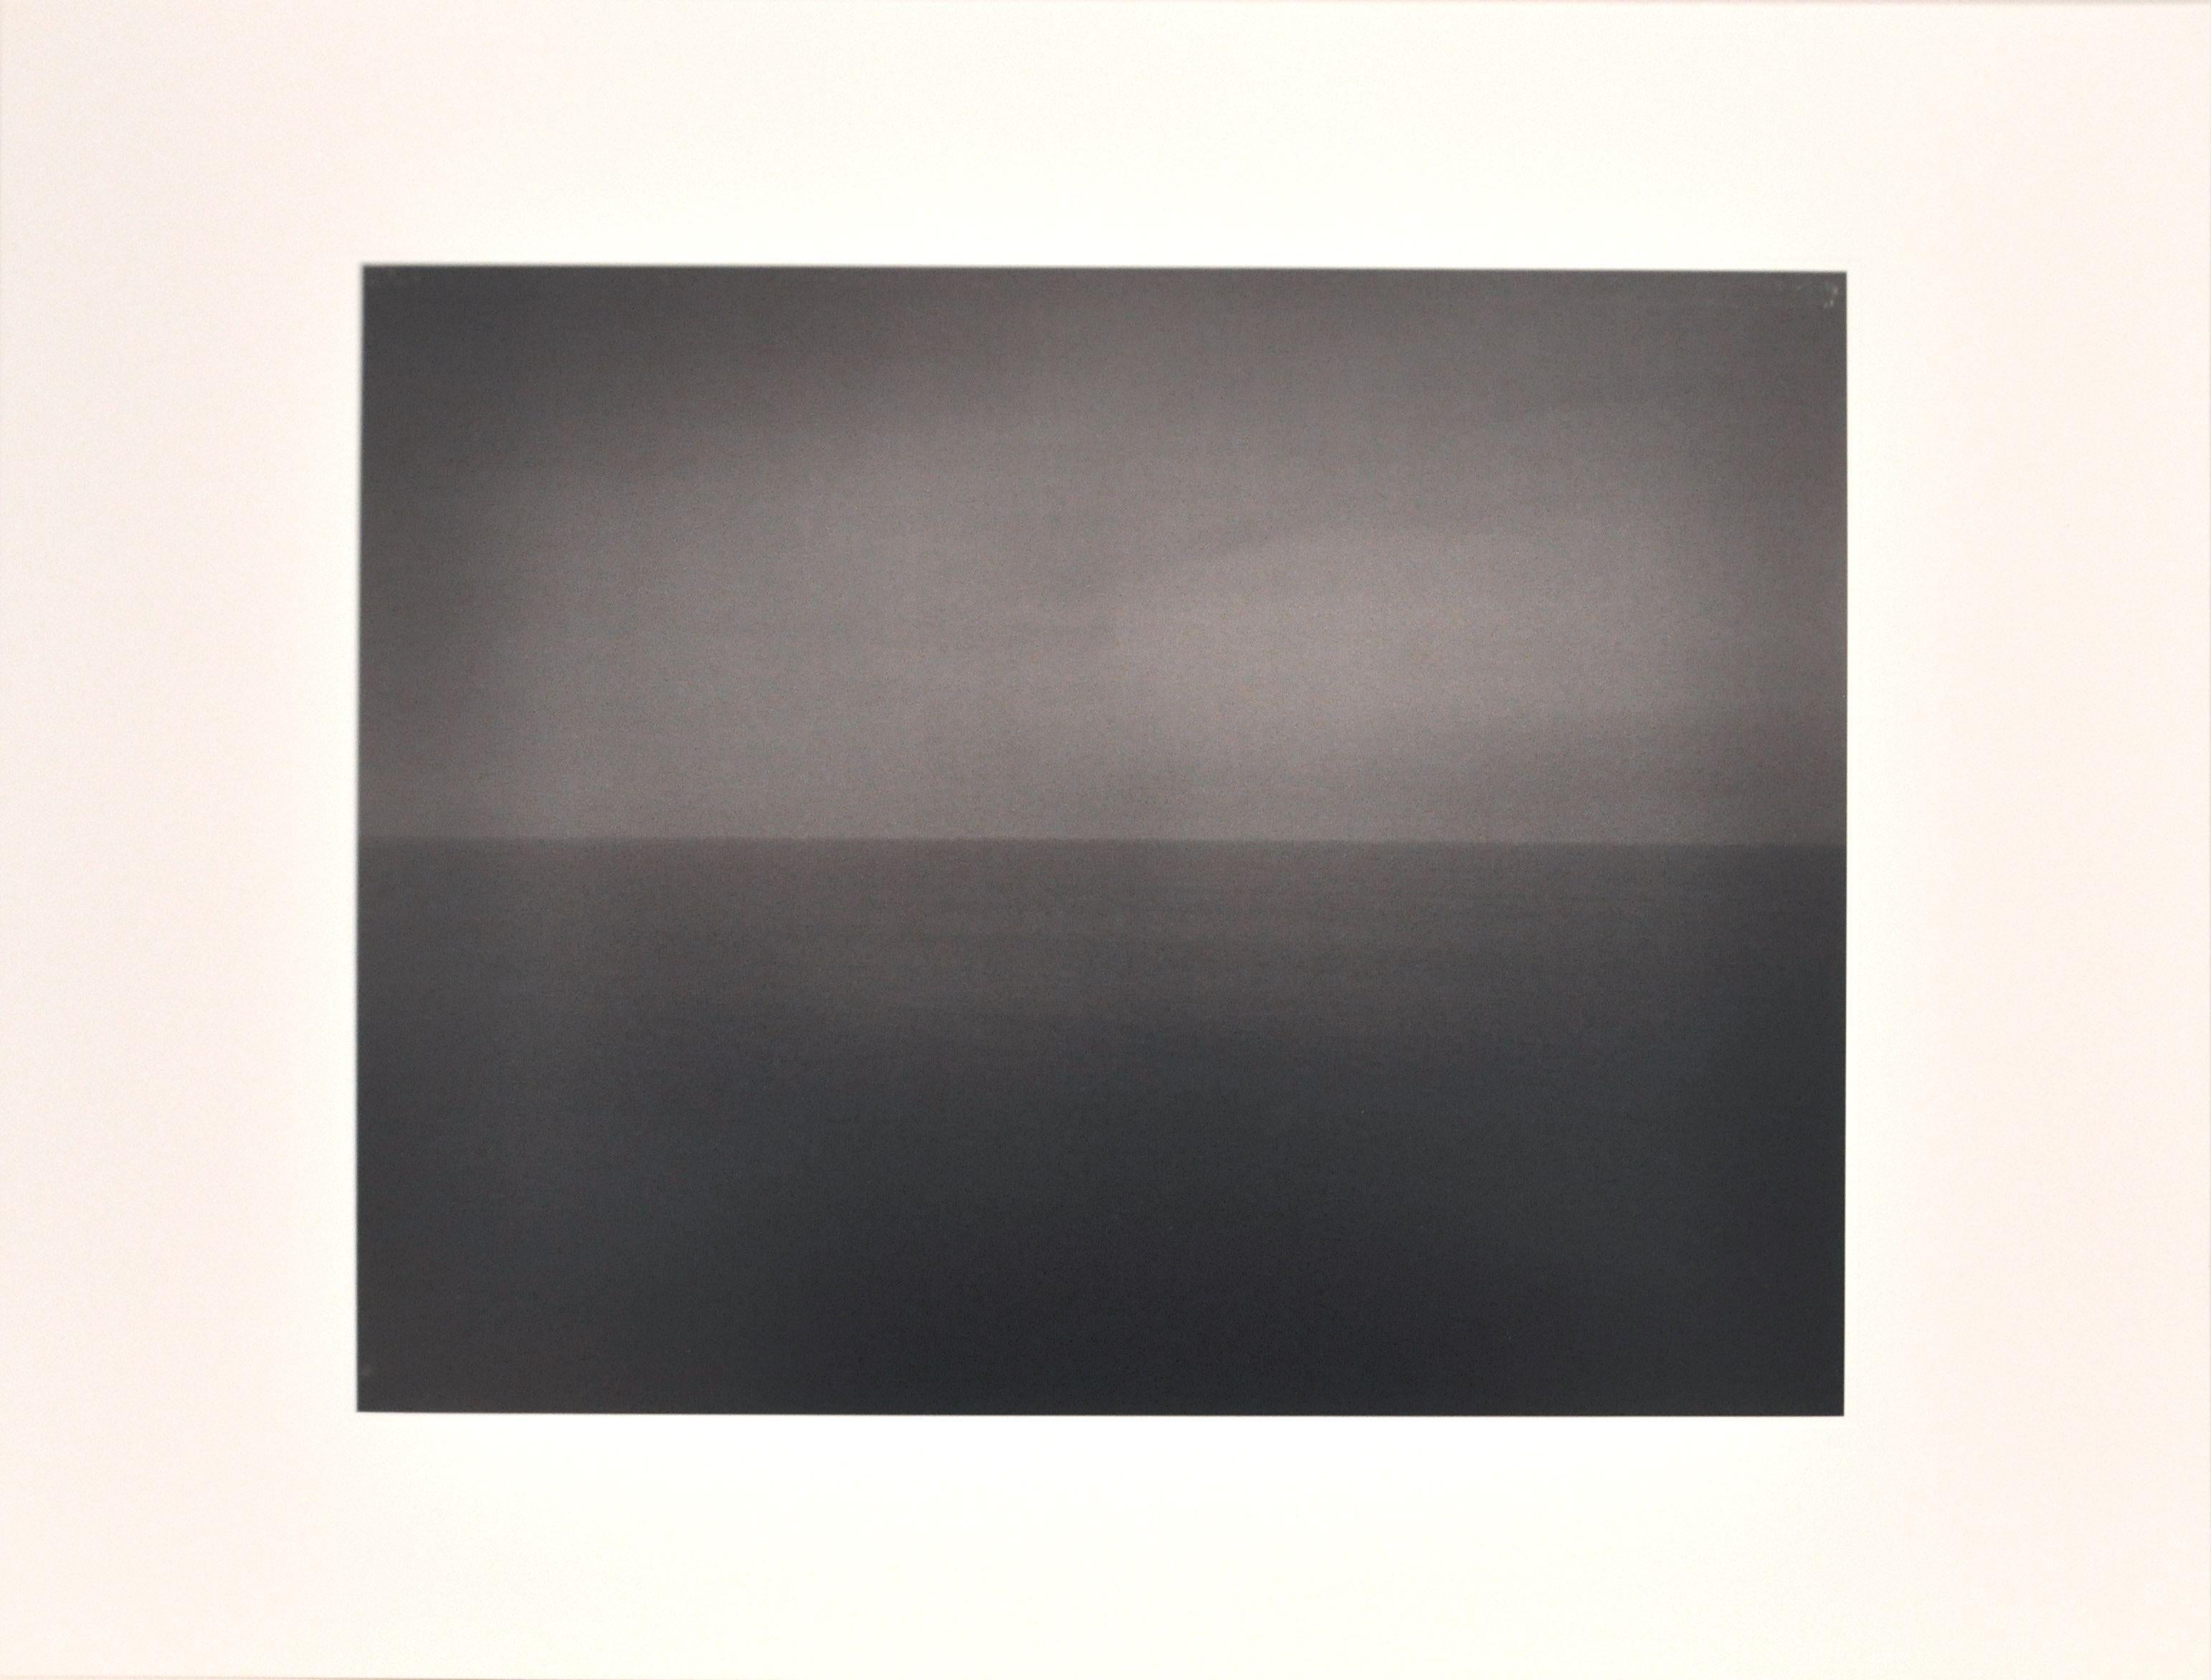 “I imagine my vision then try to make it happen, just like painting,” Sugimoto says. “The reality is there, but how to make it like my reality.”
This photograph by Hiroshi Sugimoto exemplifies his "Time Exposed" series. Here, the image depicts a